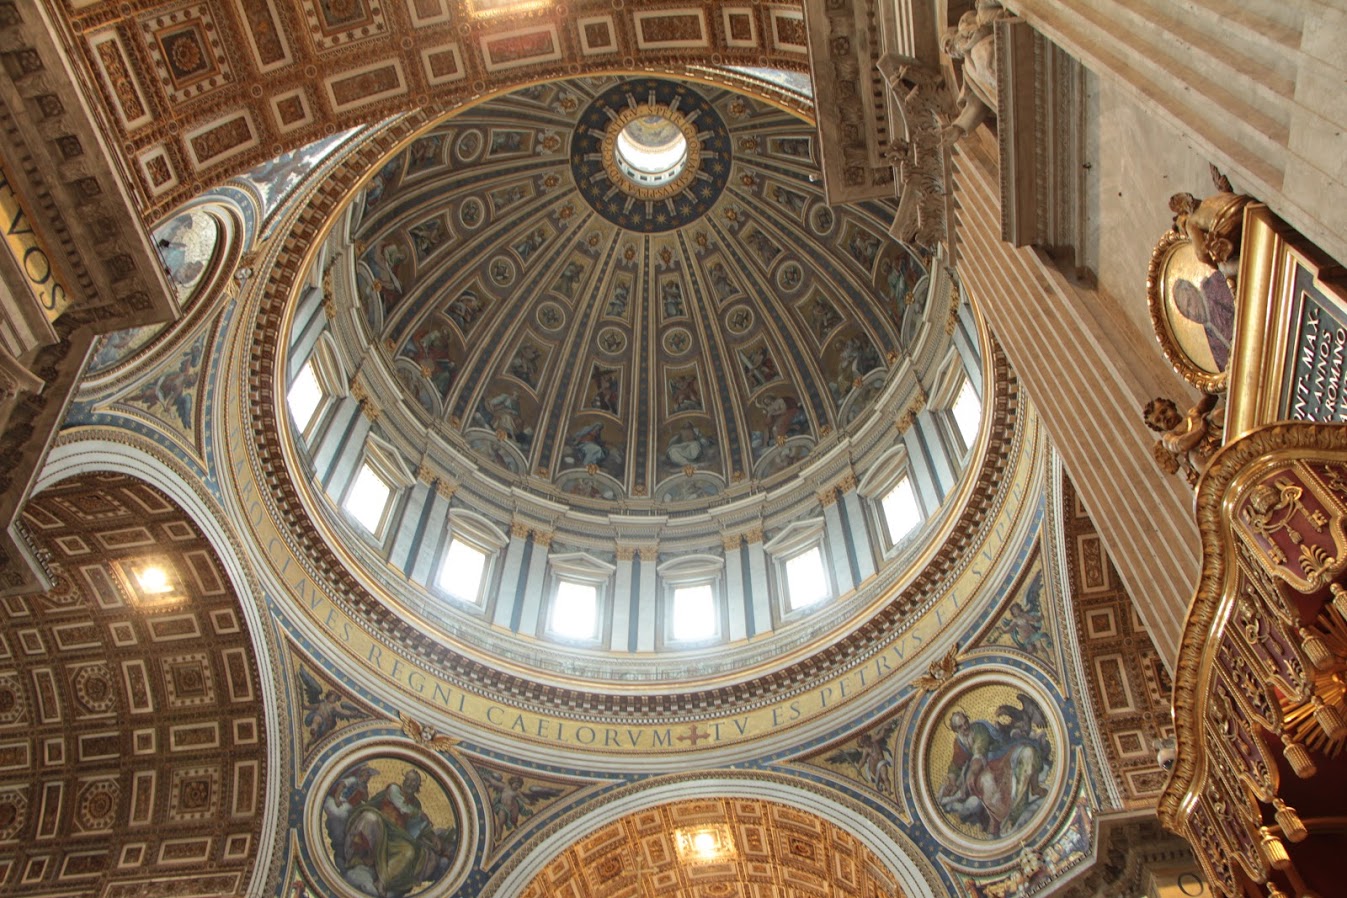 Dome in St. Peter's Basilica